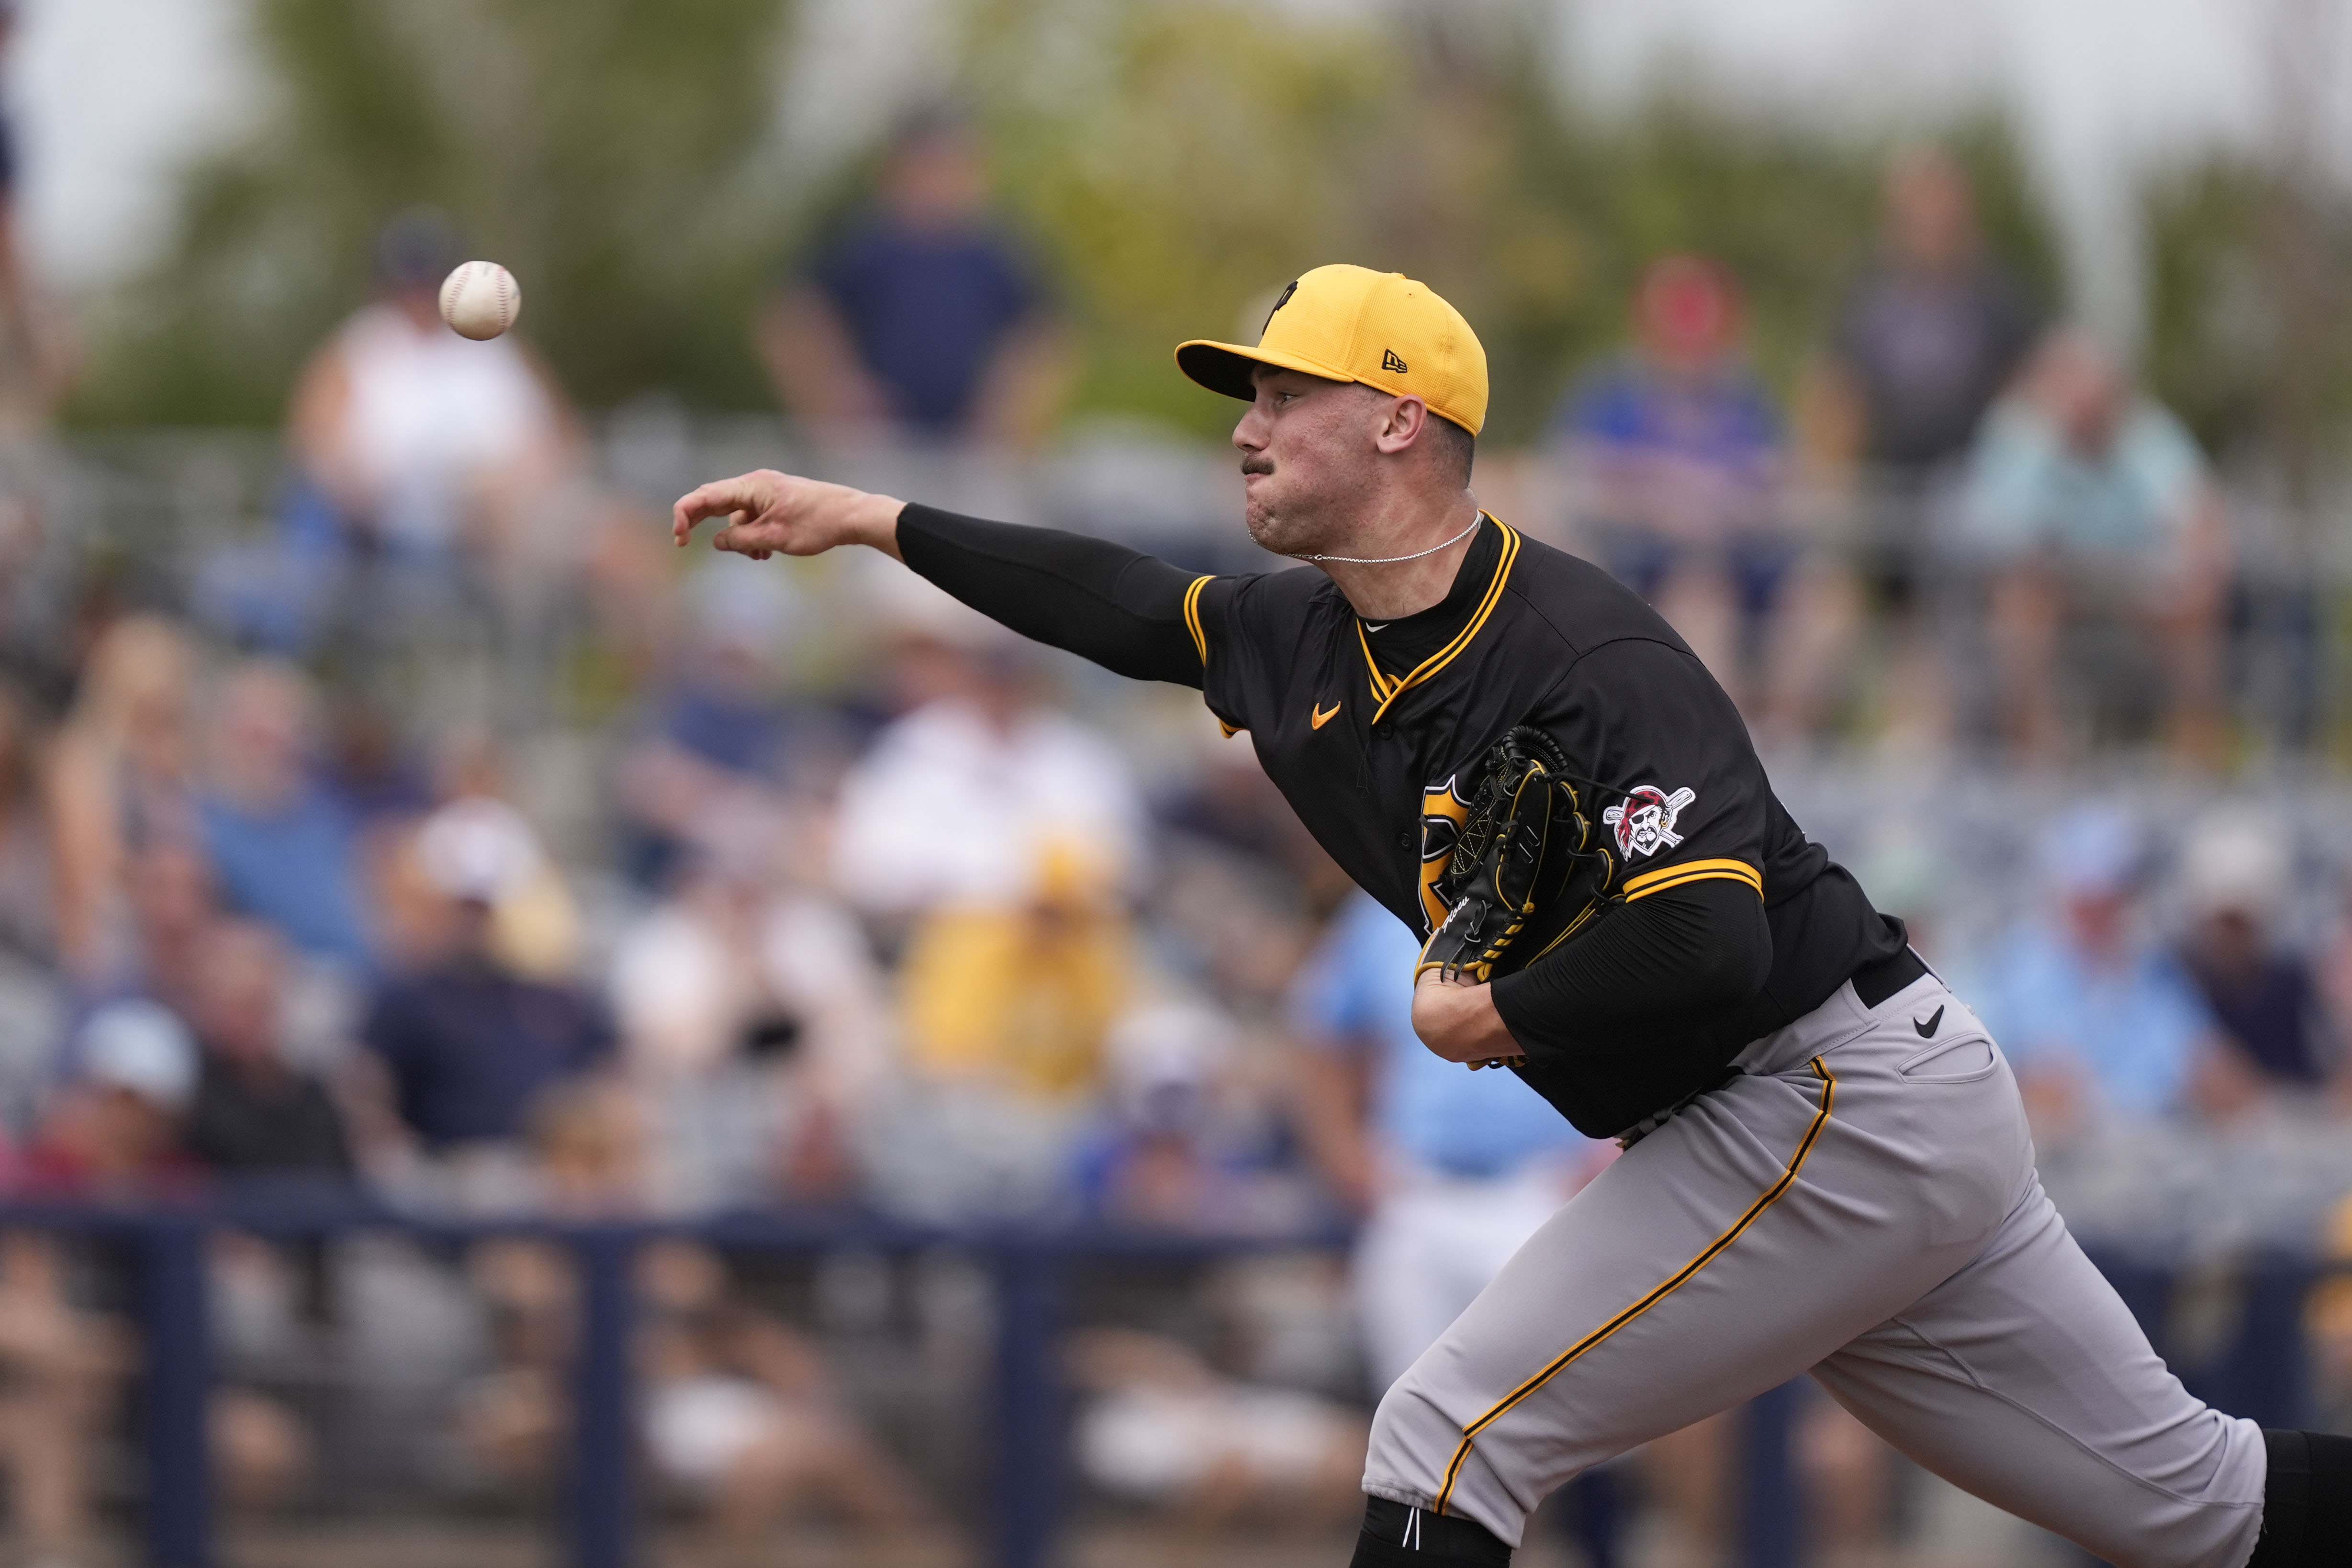 Skenes is awaiting his first call up to the majors with the Pittsburgh Pirates